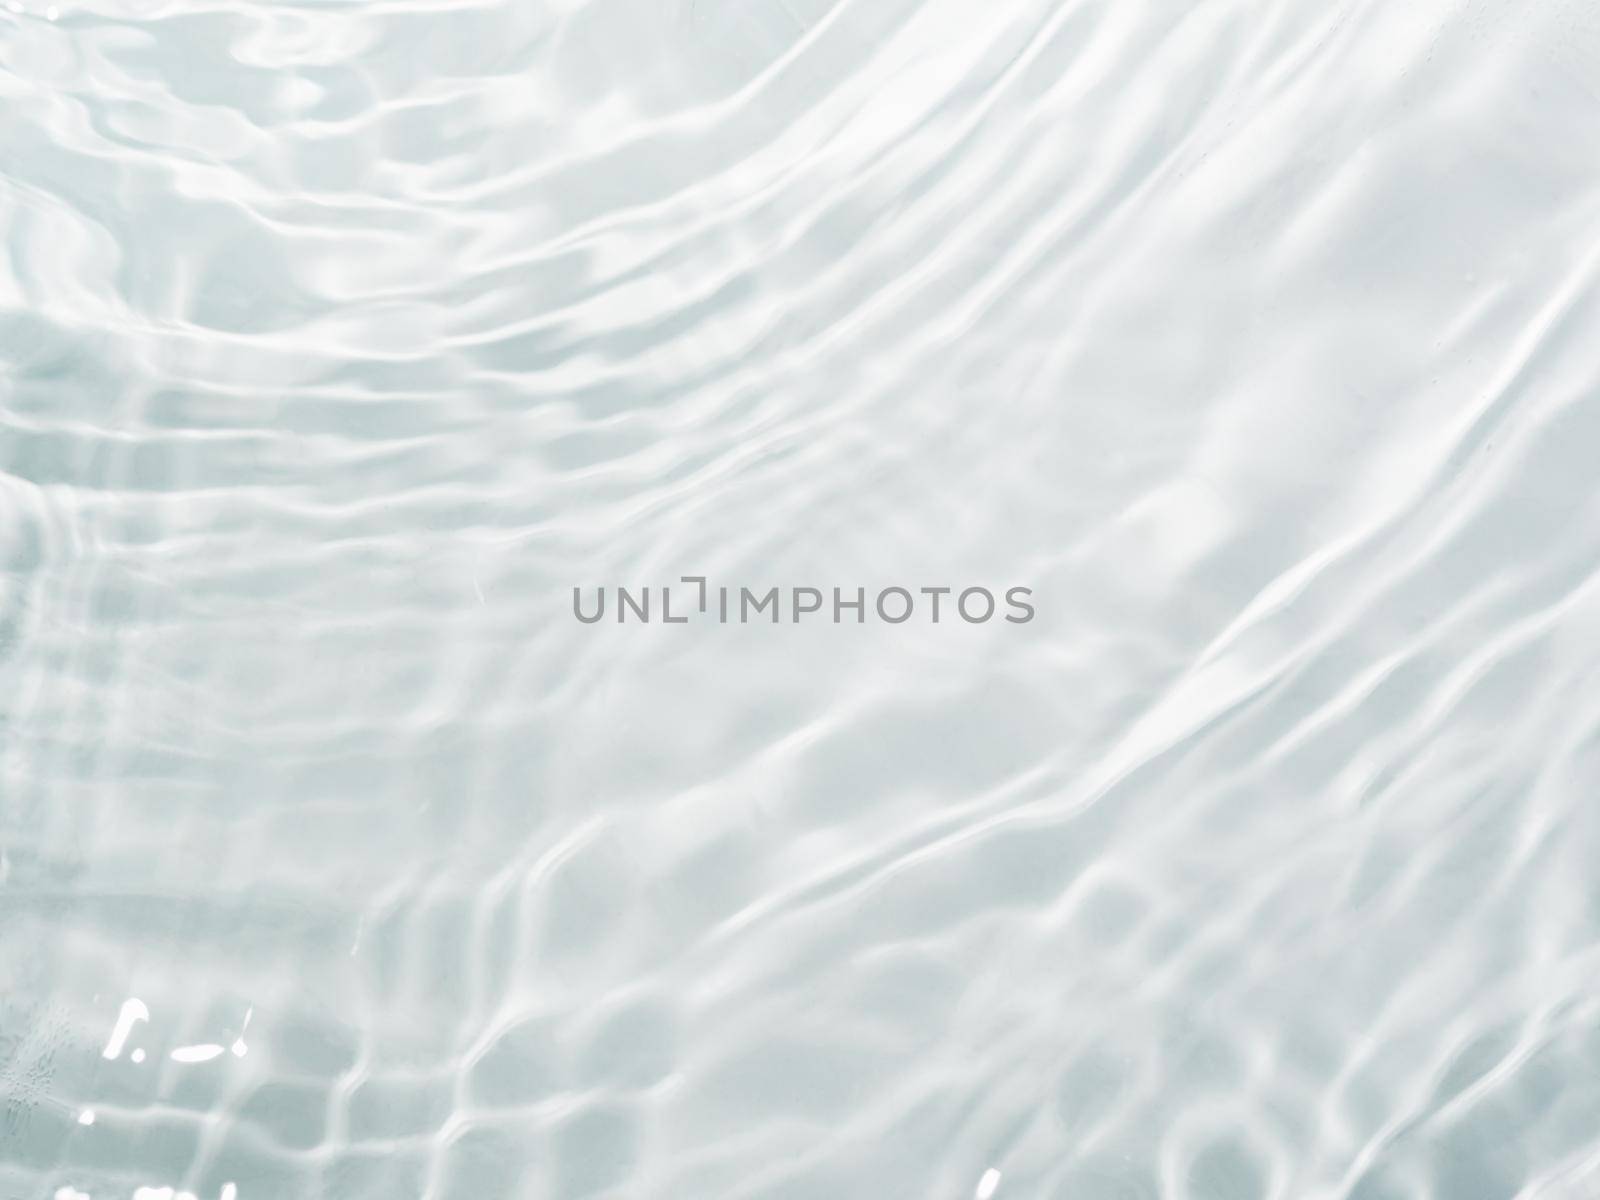 Ripple water texture with shadows on white by fascinadora